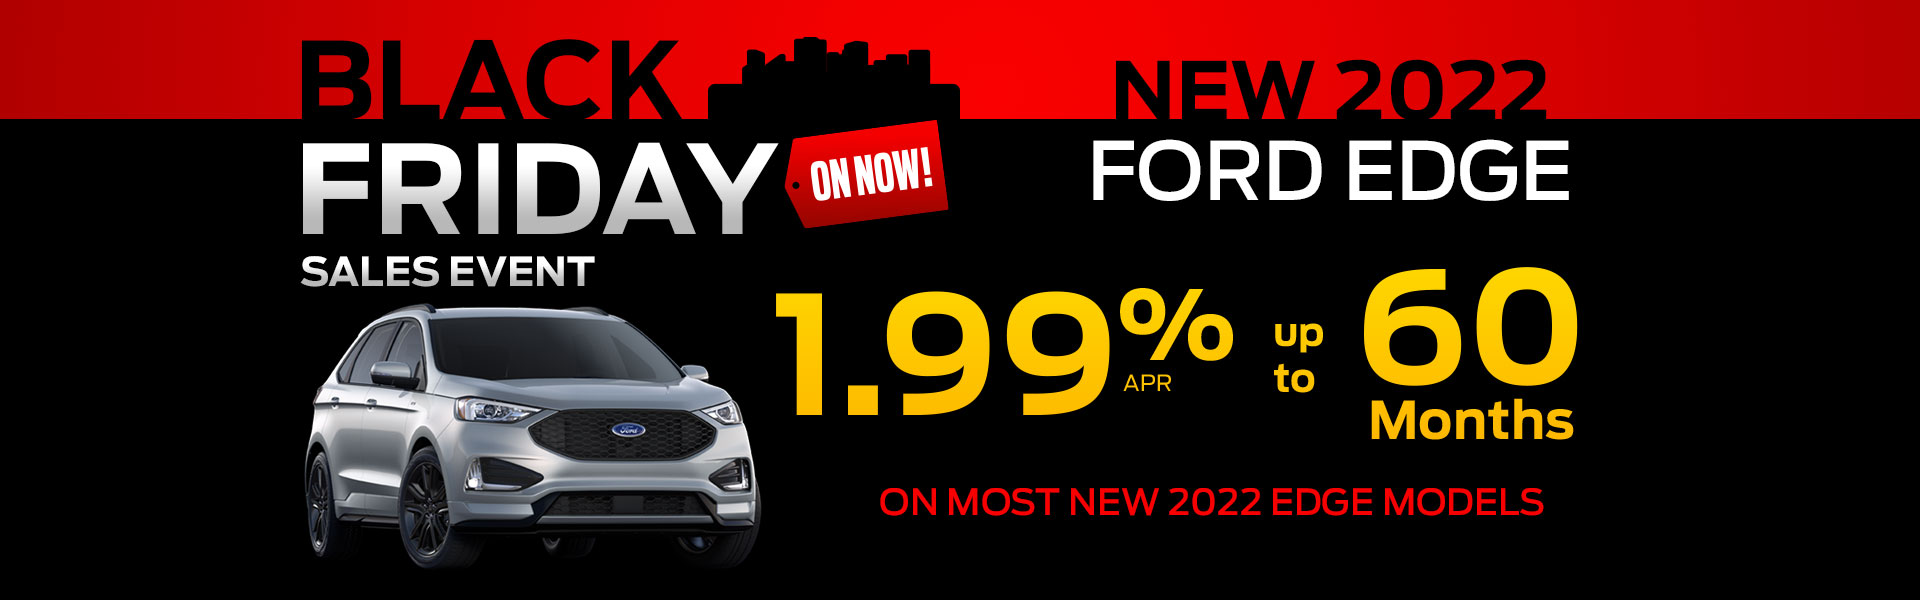 2022 Ford Edge Black Friday Sales Event